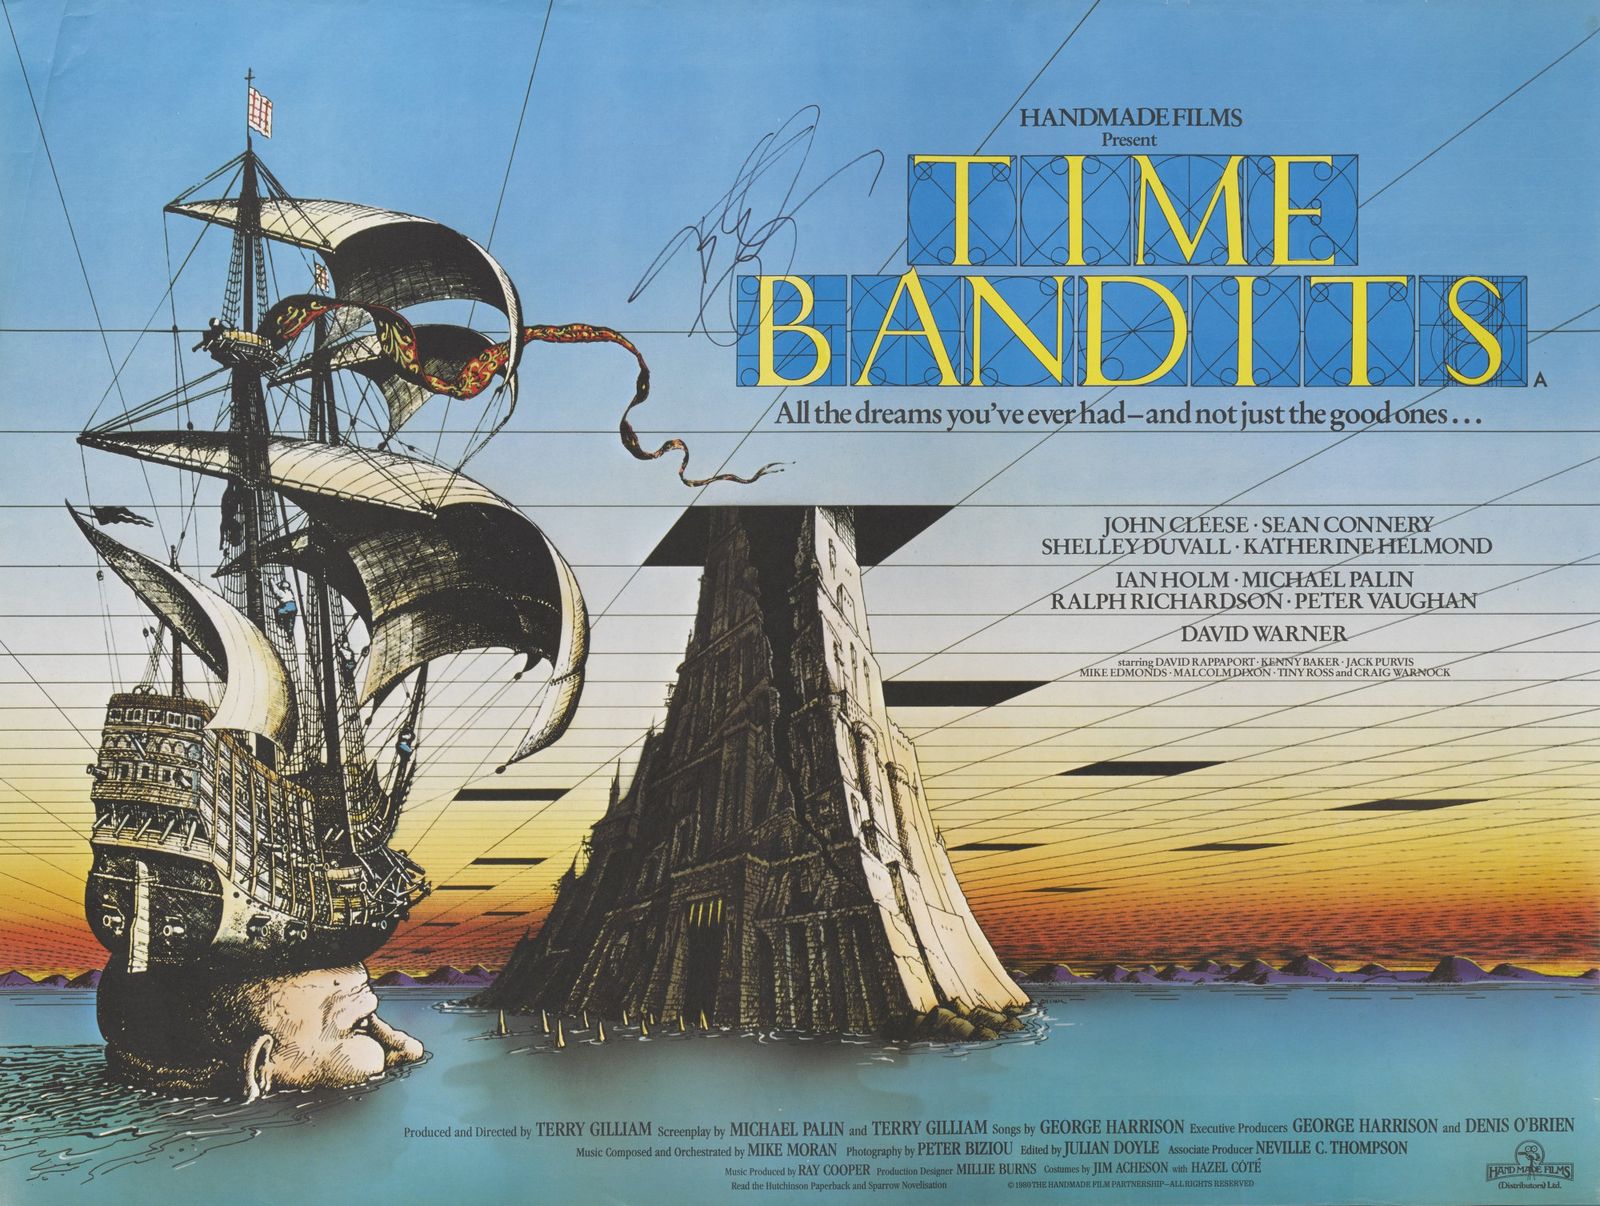 Time machine user interfaces: Time Bandits